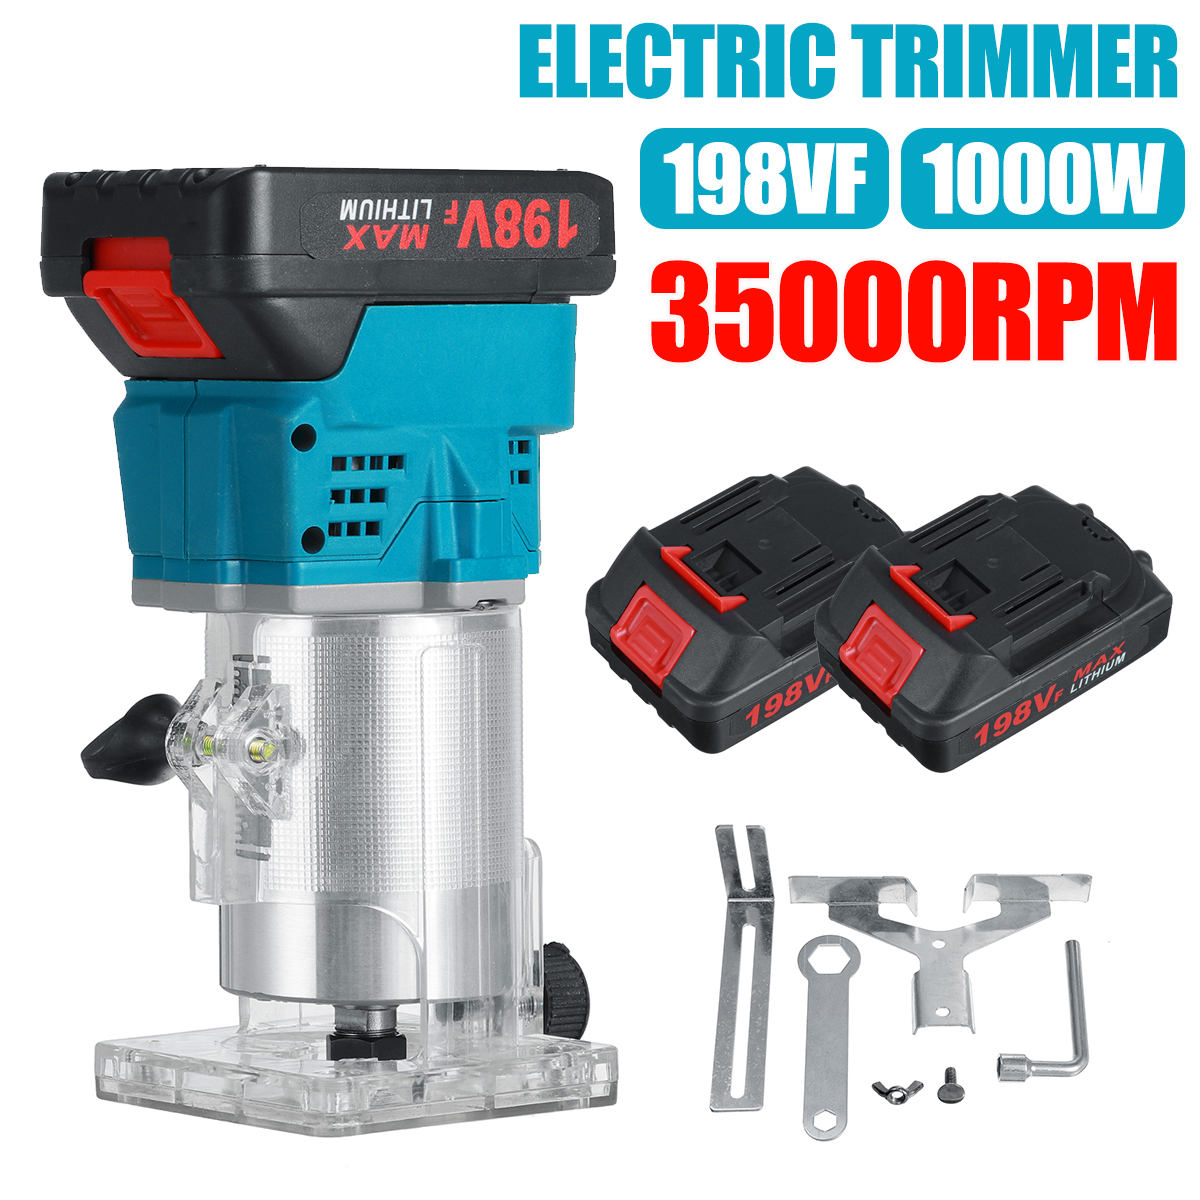 198VF-3000rpm-1000W-Brushless-Electric-Trimmer-Rechargeable-Woodworking-Trimming-Machine-W-12pcs-Bat-1829457-1